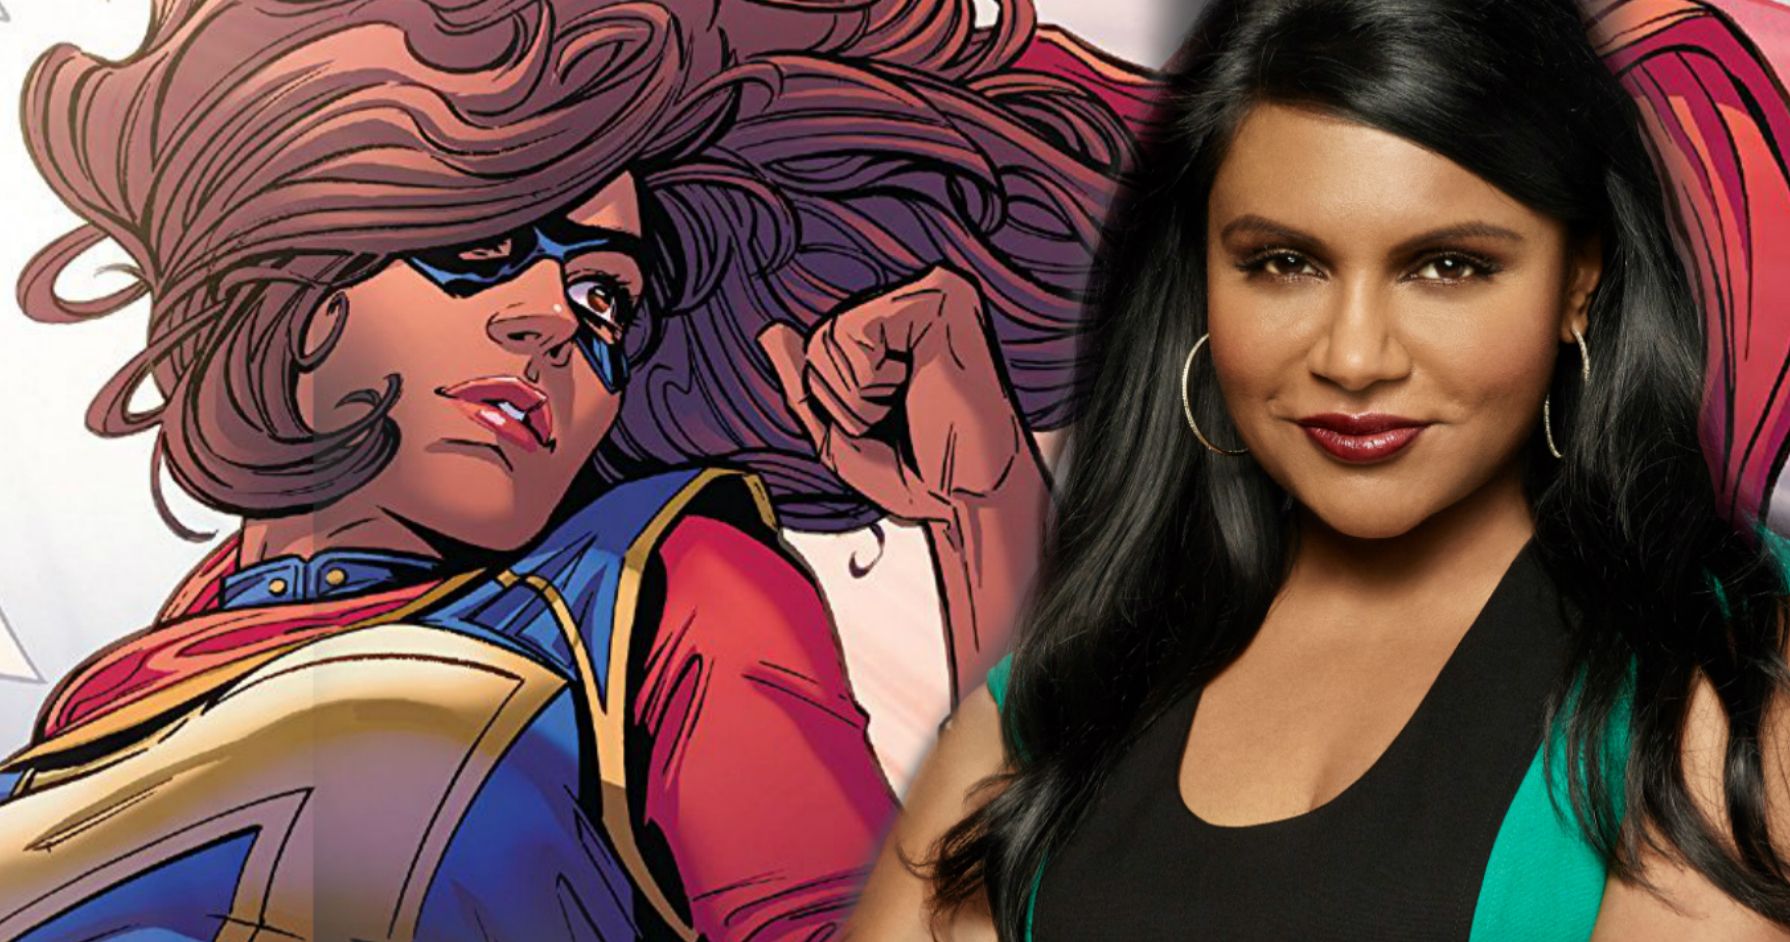 Ms. Marvel Talks Have Happened Between Marvel and Mindy Kaling